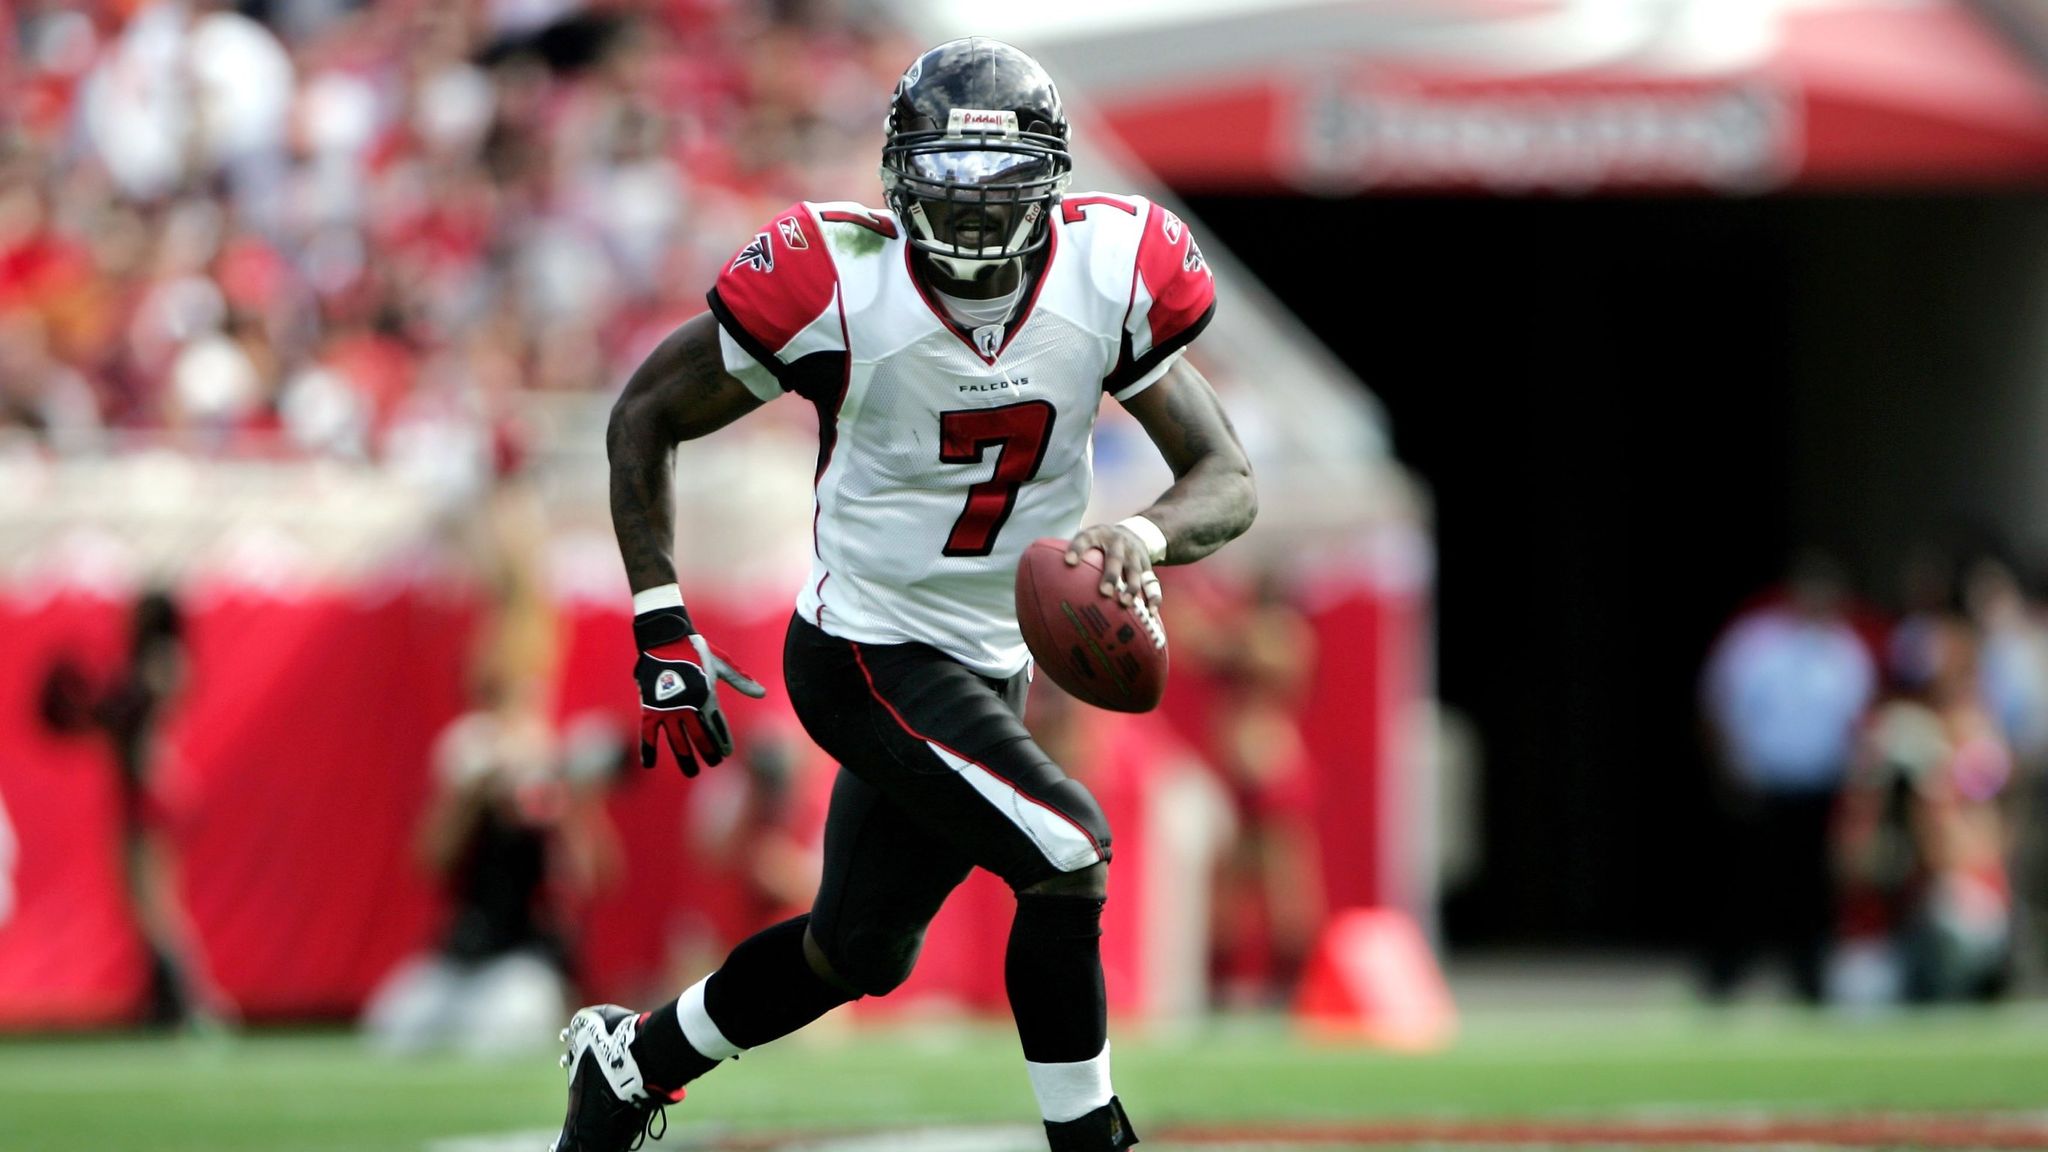 Michael Vick ends NFL career after failing to find employment | NFL News | Sky Sports